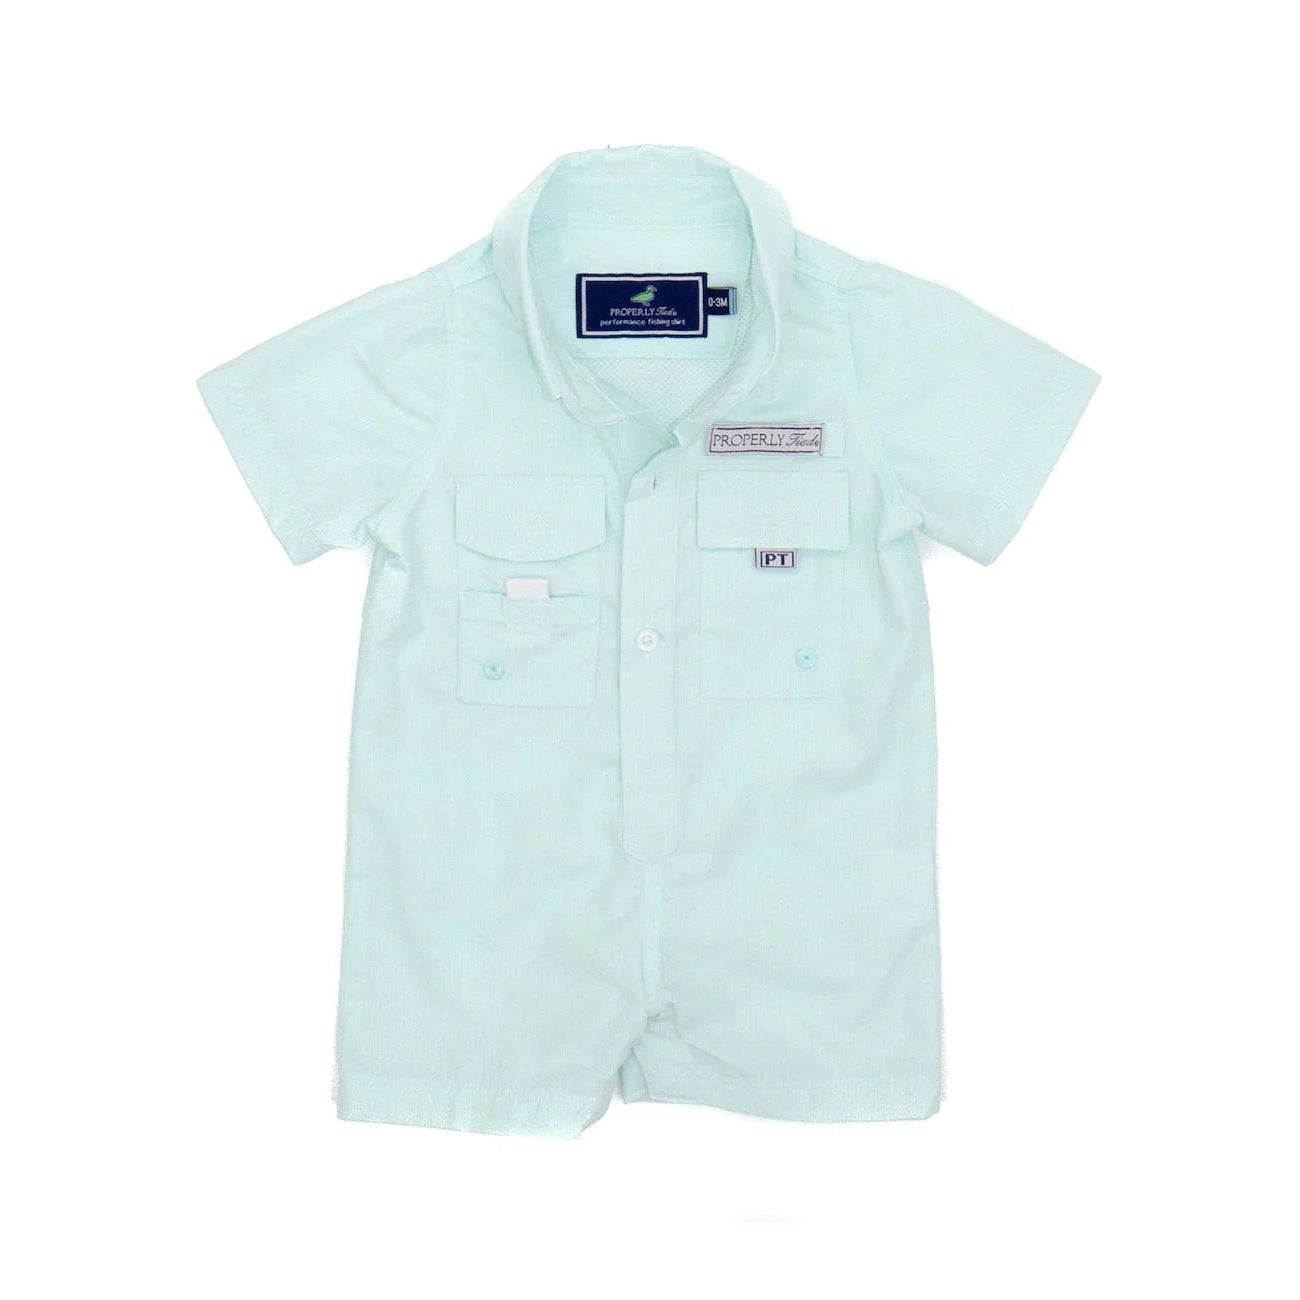 Properly Tied Seafoam Baby Performance Fishing Shortall-Properly Tied-Little Giant Kidz